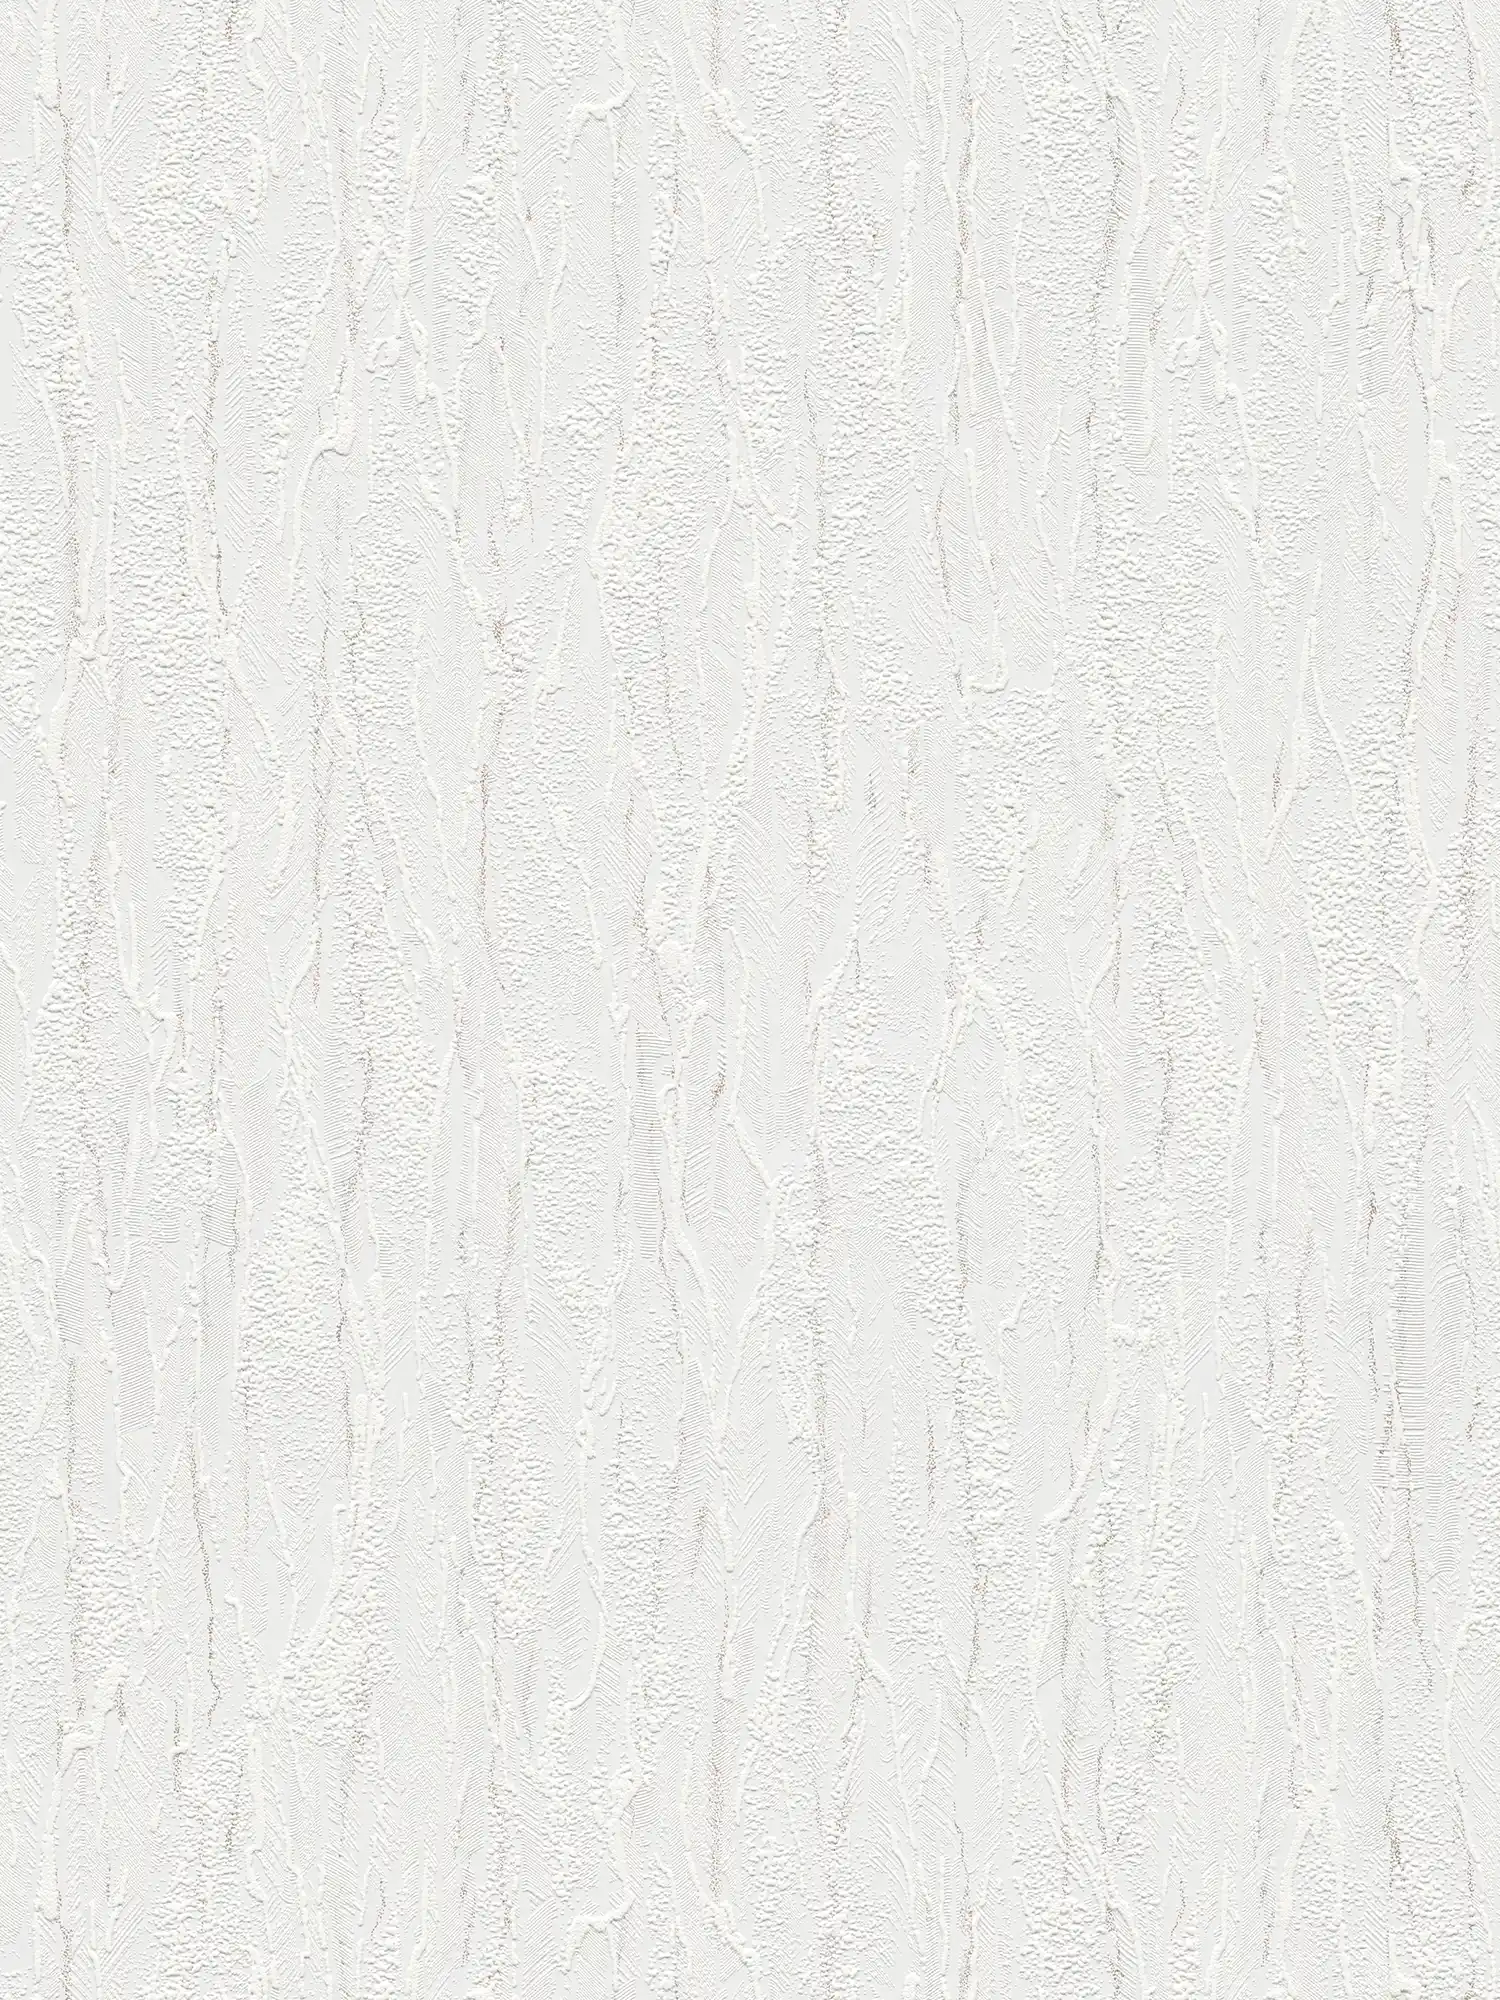 Wallpaper white textured pattern, grey accents - White
